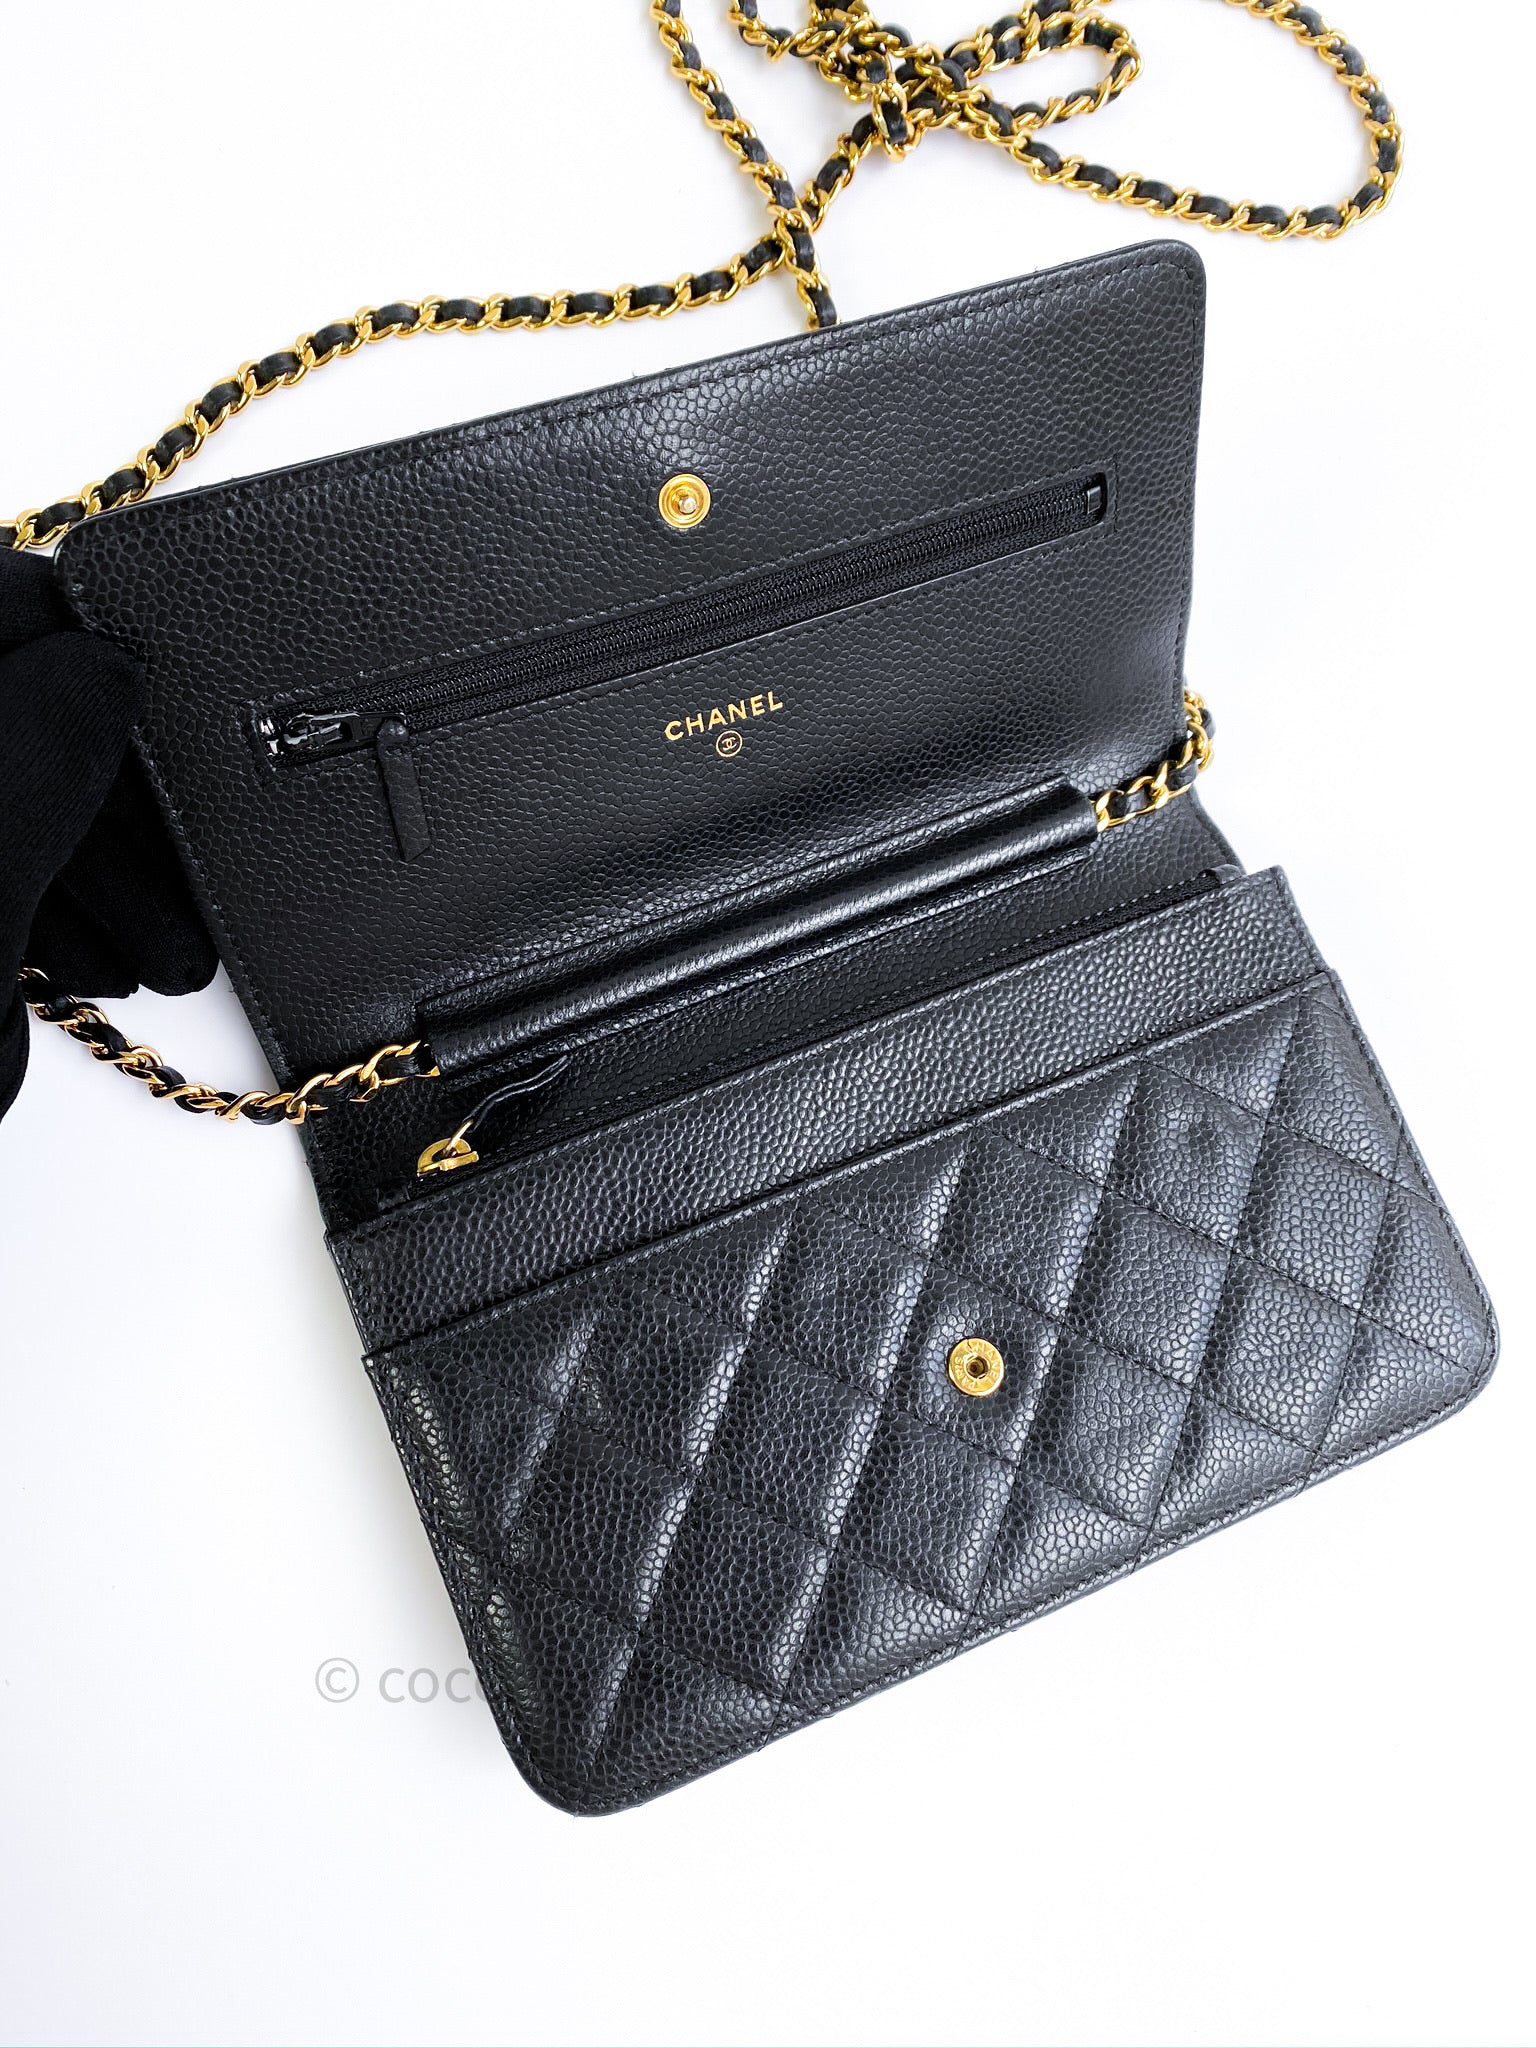 My Top 3 Favorite Chanel Bags, Gallery posted by Elyse Aiyana